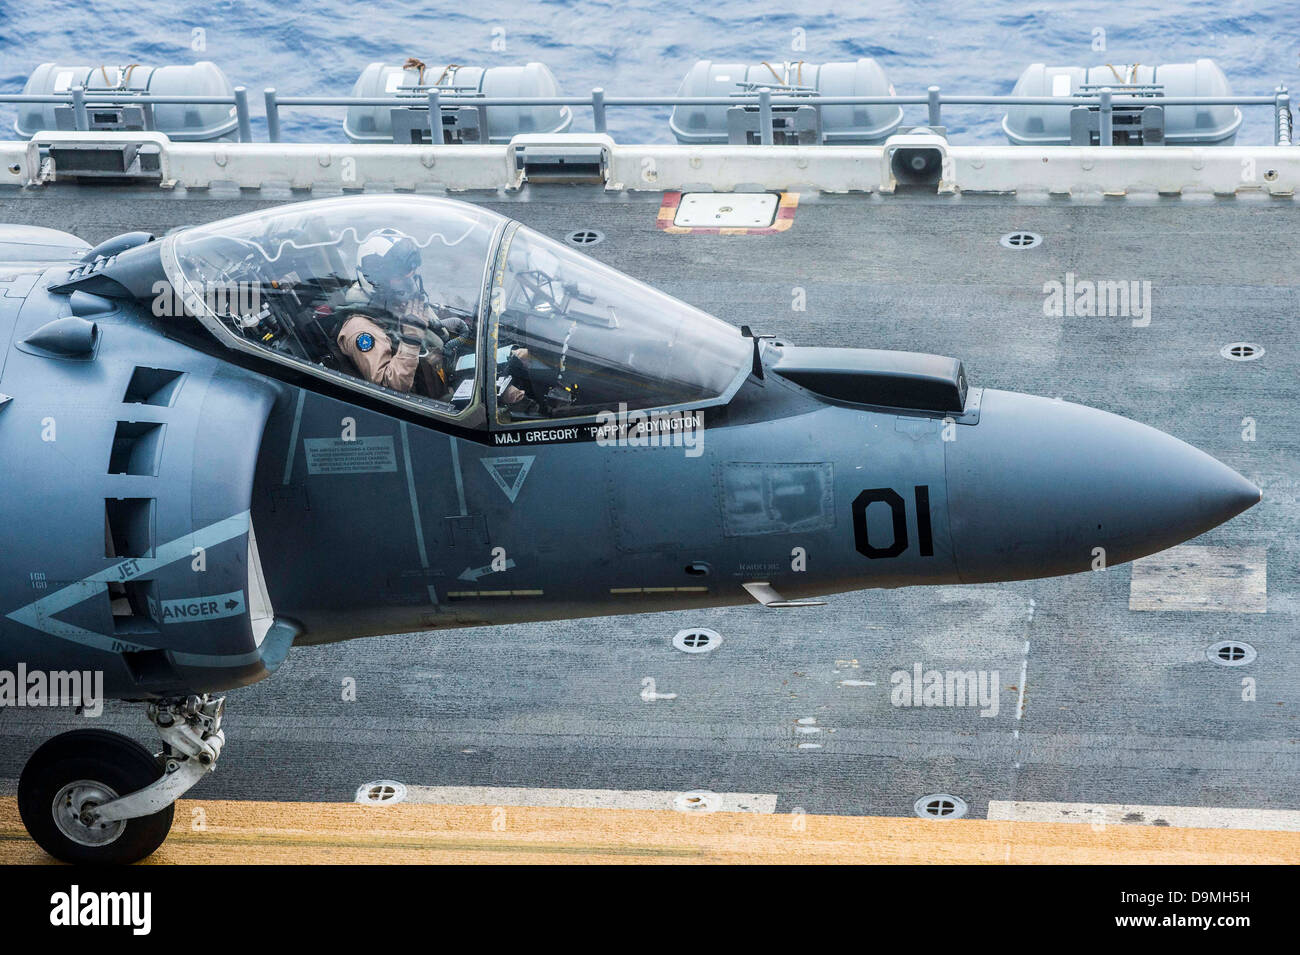 US Marine Corps pilot Maj. Gregory Boyington salutes the landing signalman from his AV-8B Harrier fighter aircraft before taking off from the amphibious assault ship USS Bonhomme Richard June 20, 2013 in the East China Sea. Stock Photo